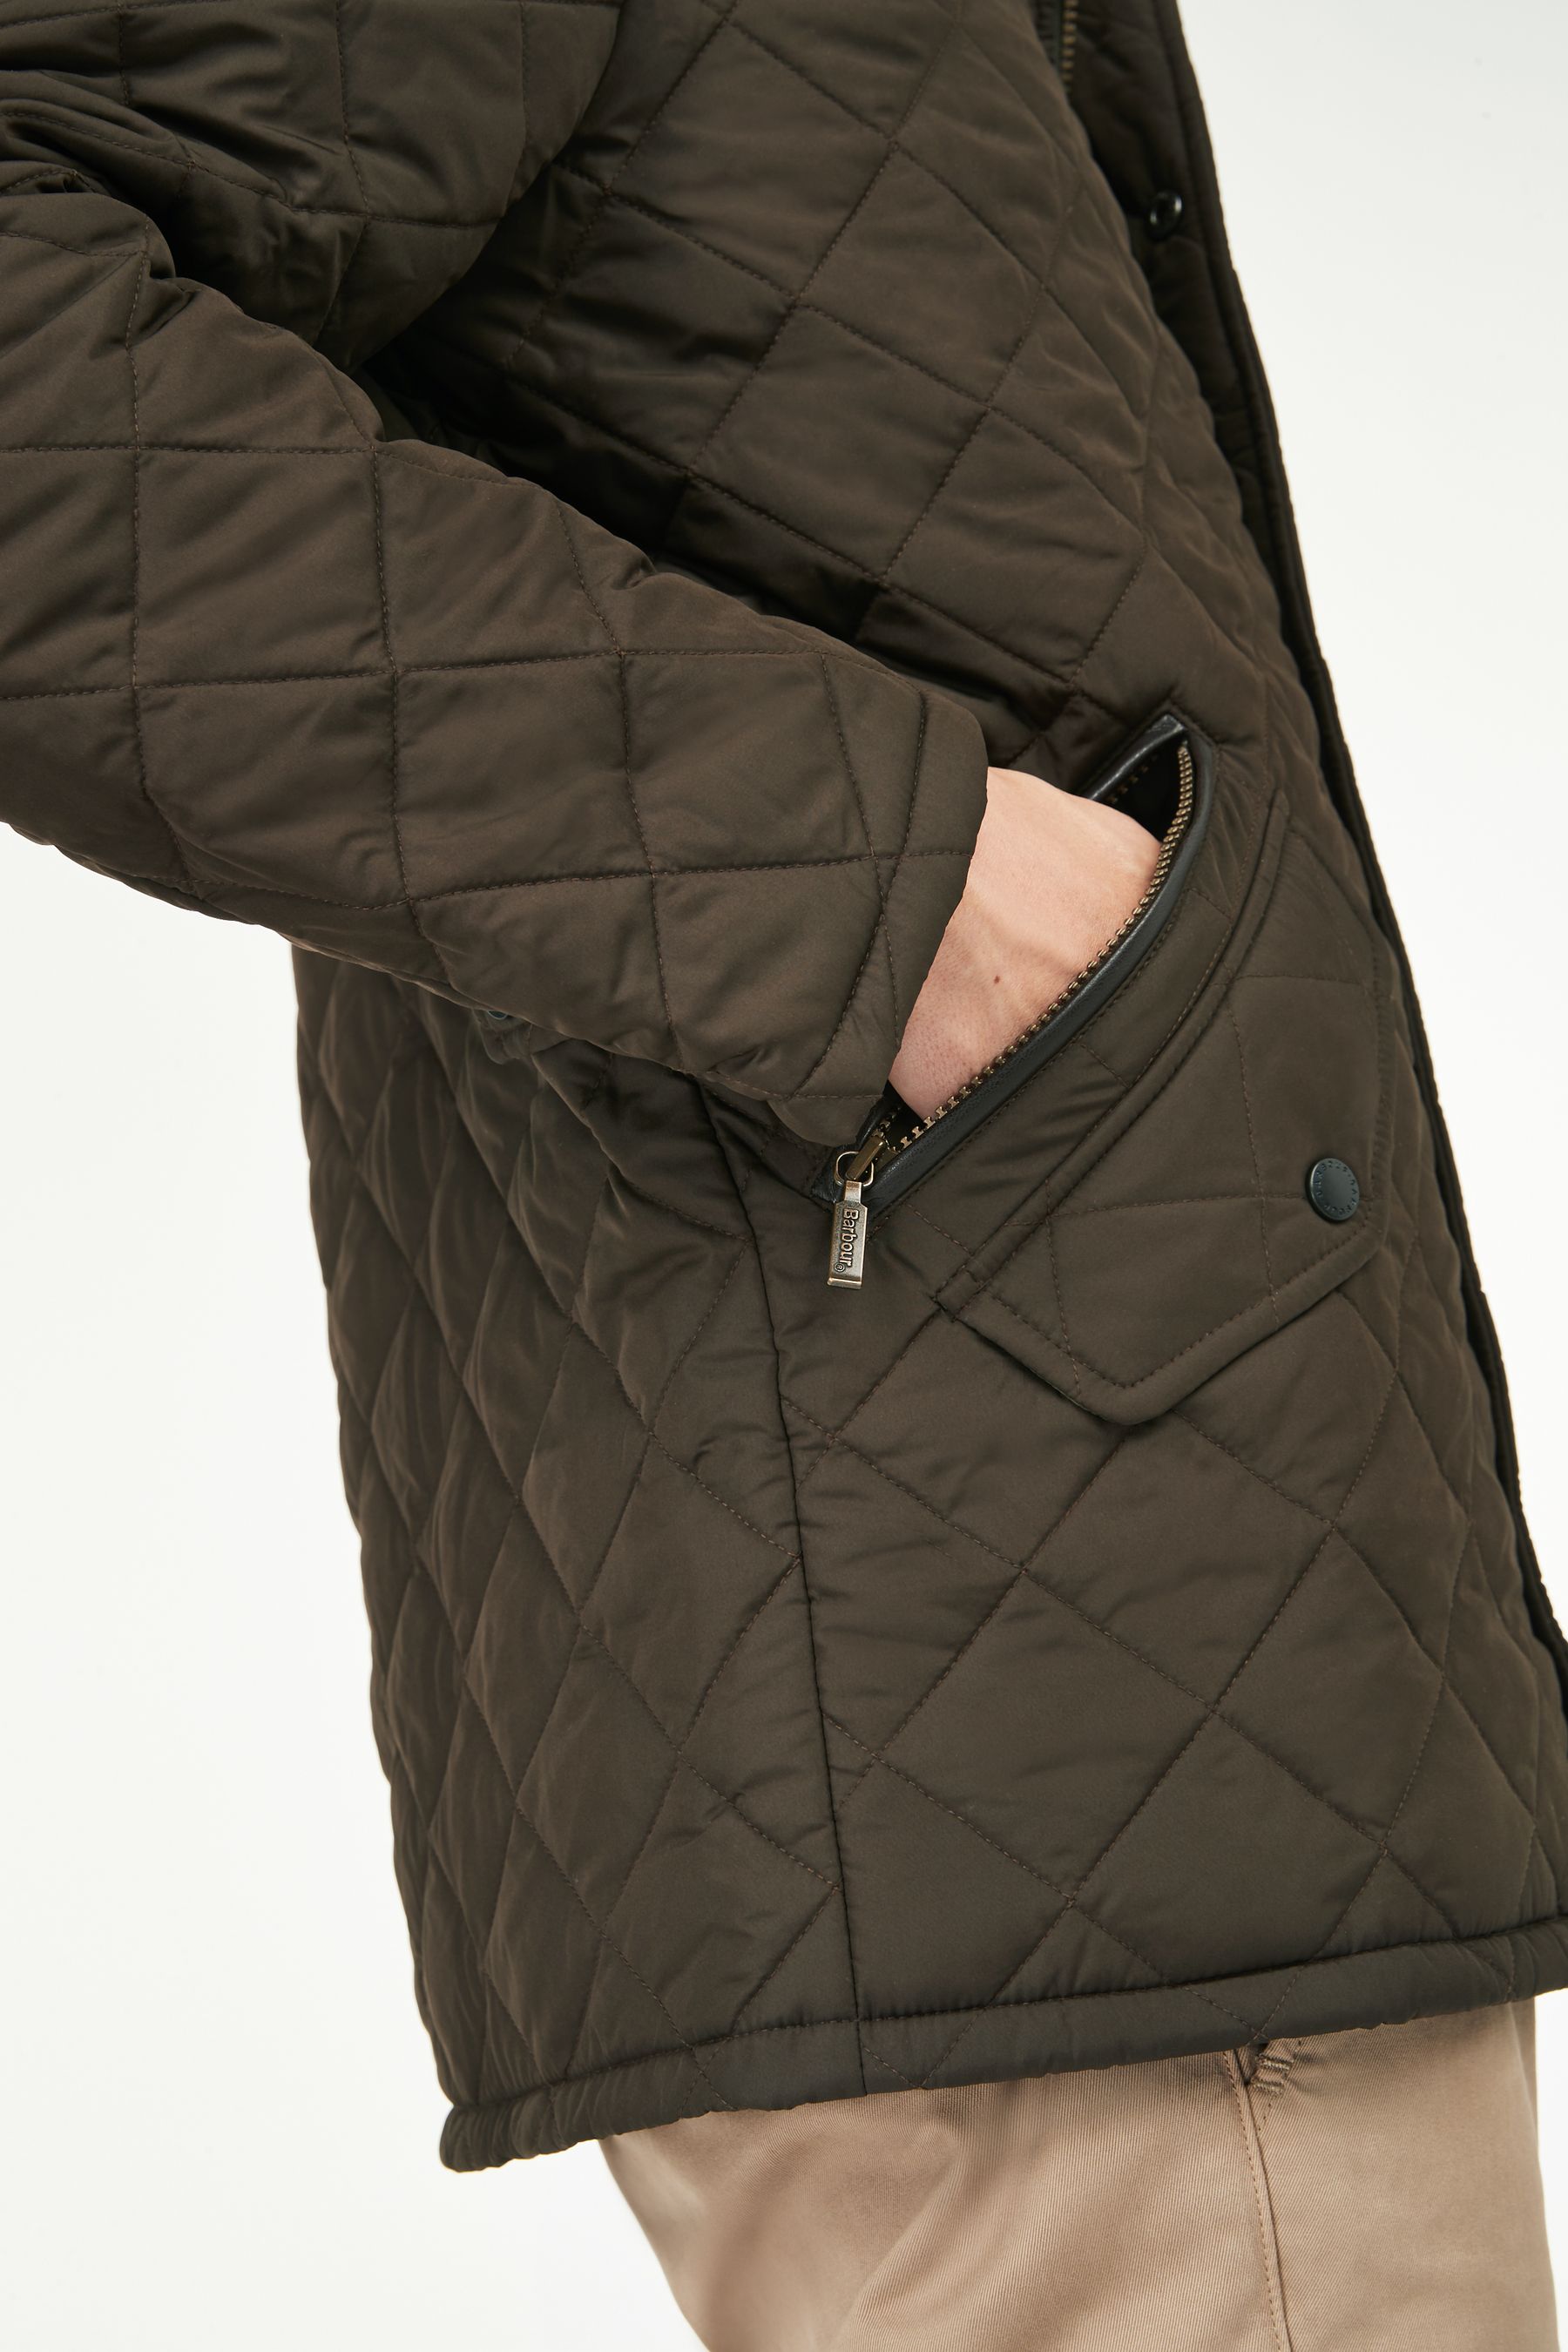 Buy Barbour® Chelsea Quilted Jacket from the Next UK online shop